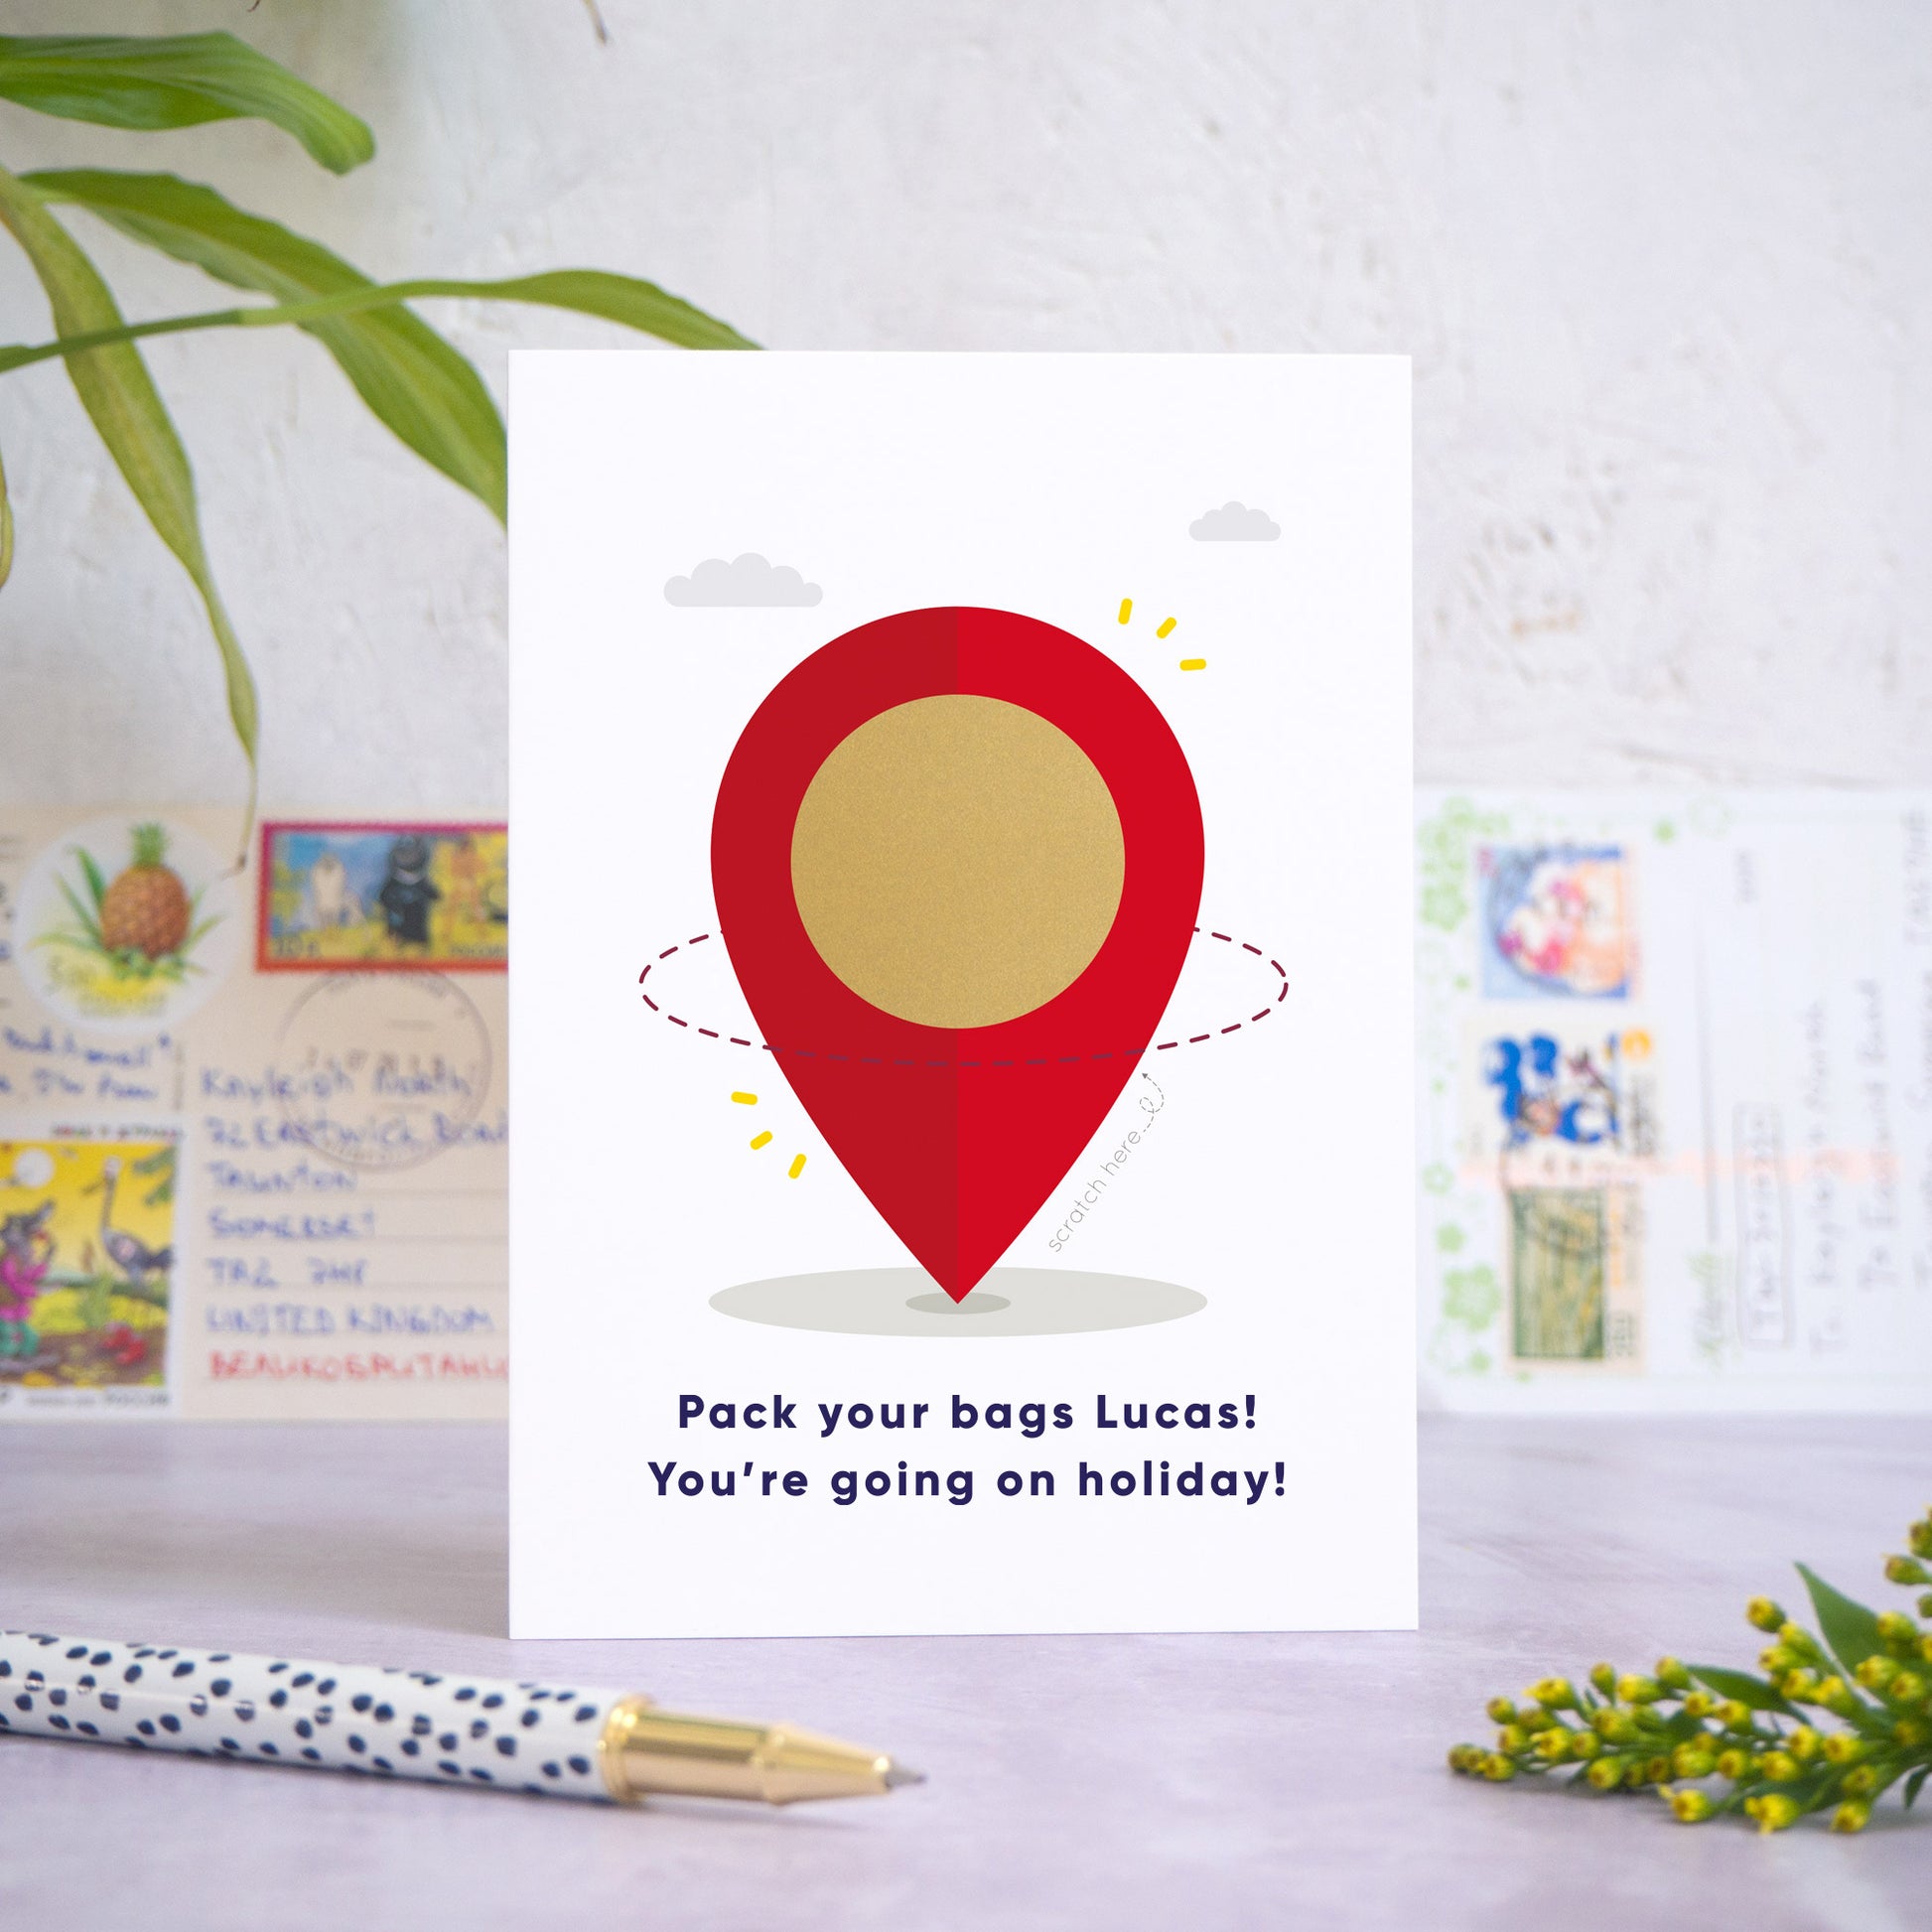 A location pin holiday reveal scratch card featuring a big red location marker, with clouds in the background. The location is in the centre of the pin and has been hidden underneath the gold panel scratch panel. Beneath the pin reads: “Pack your bags [insert recipients name]! You're going on holiday!”. The card is standing on a grey surface with postcards in the background and a pen and foliage in the foreground.